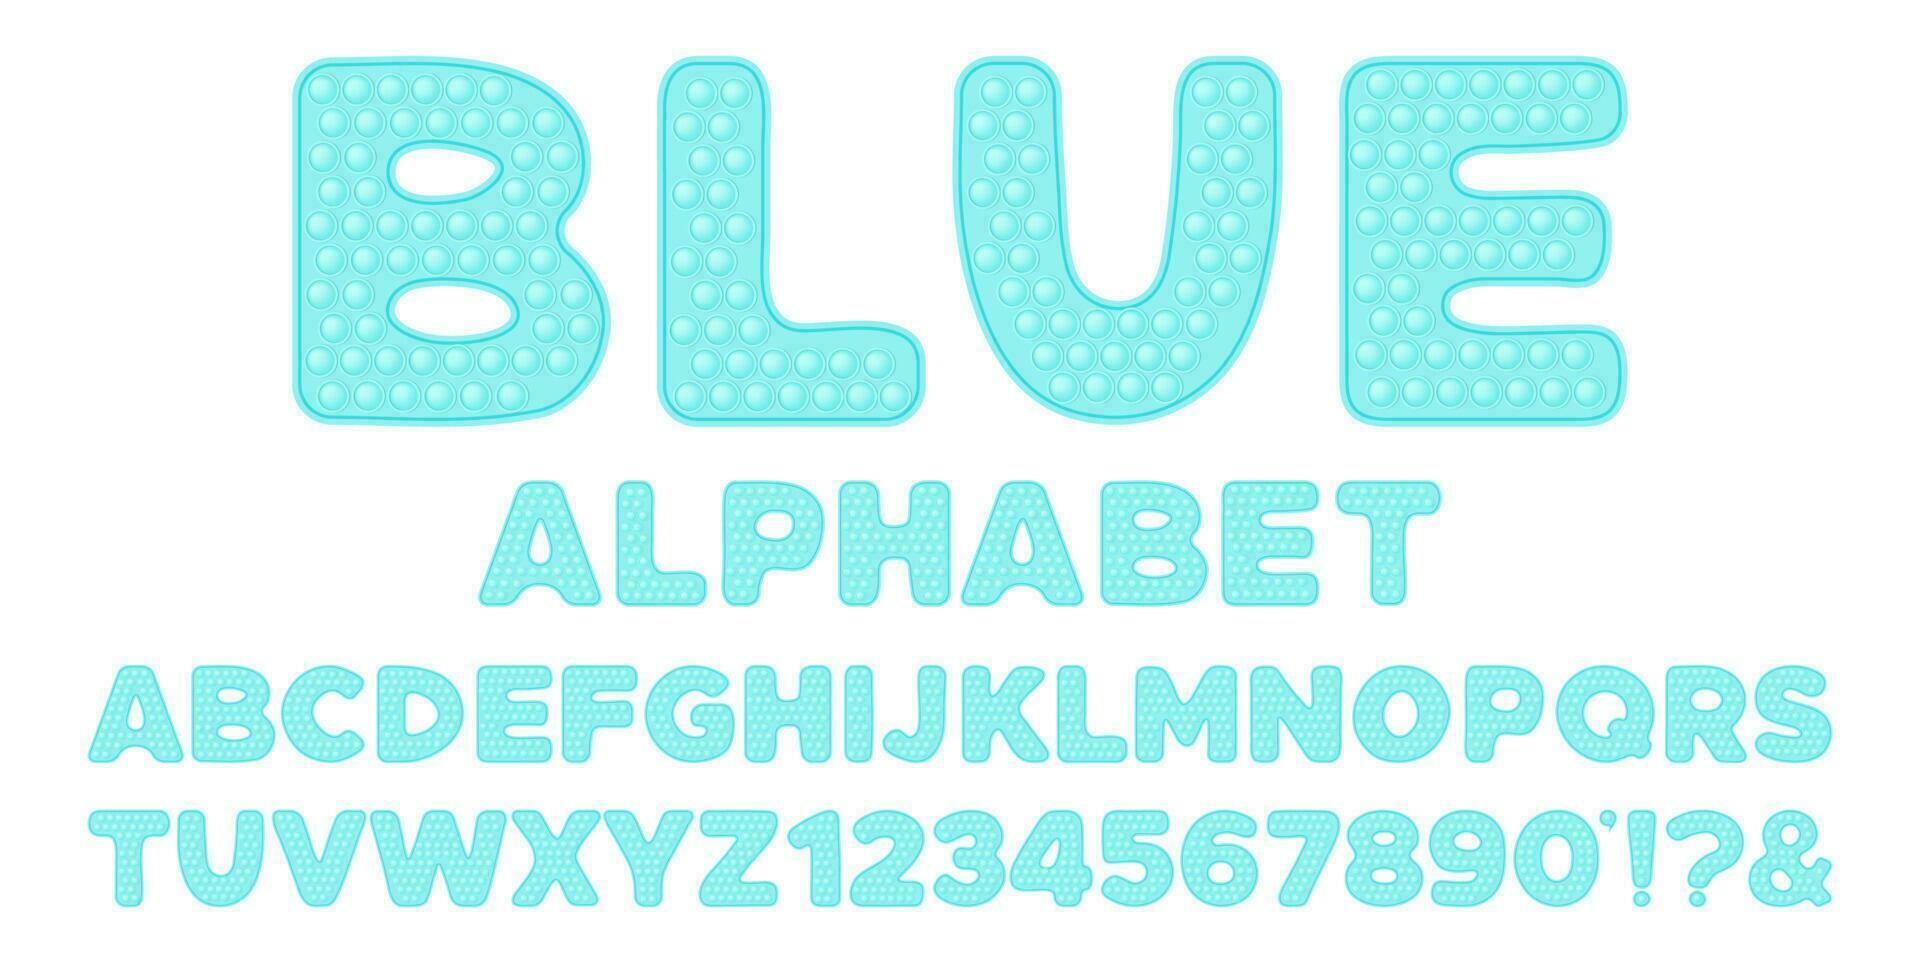 Popping toy font design - blue alphabet and numbers set in style of trendy silicon fidget toys in pastel colors. Bubble sensory letters. Isolated cartoon vector illustration.